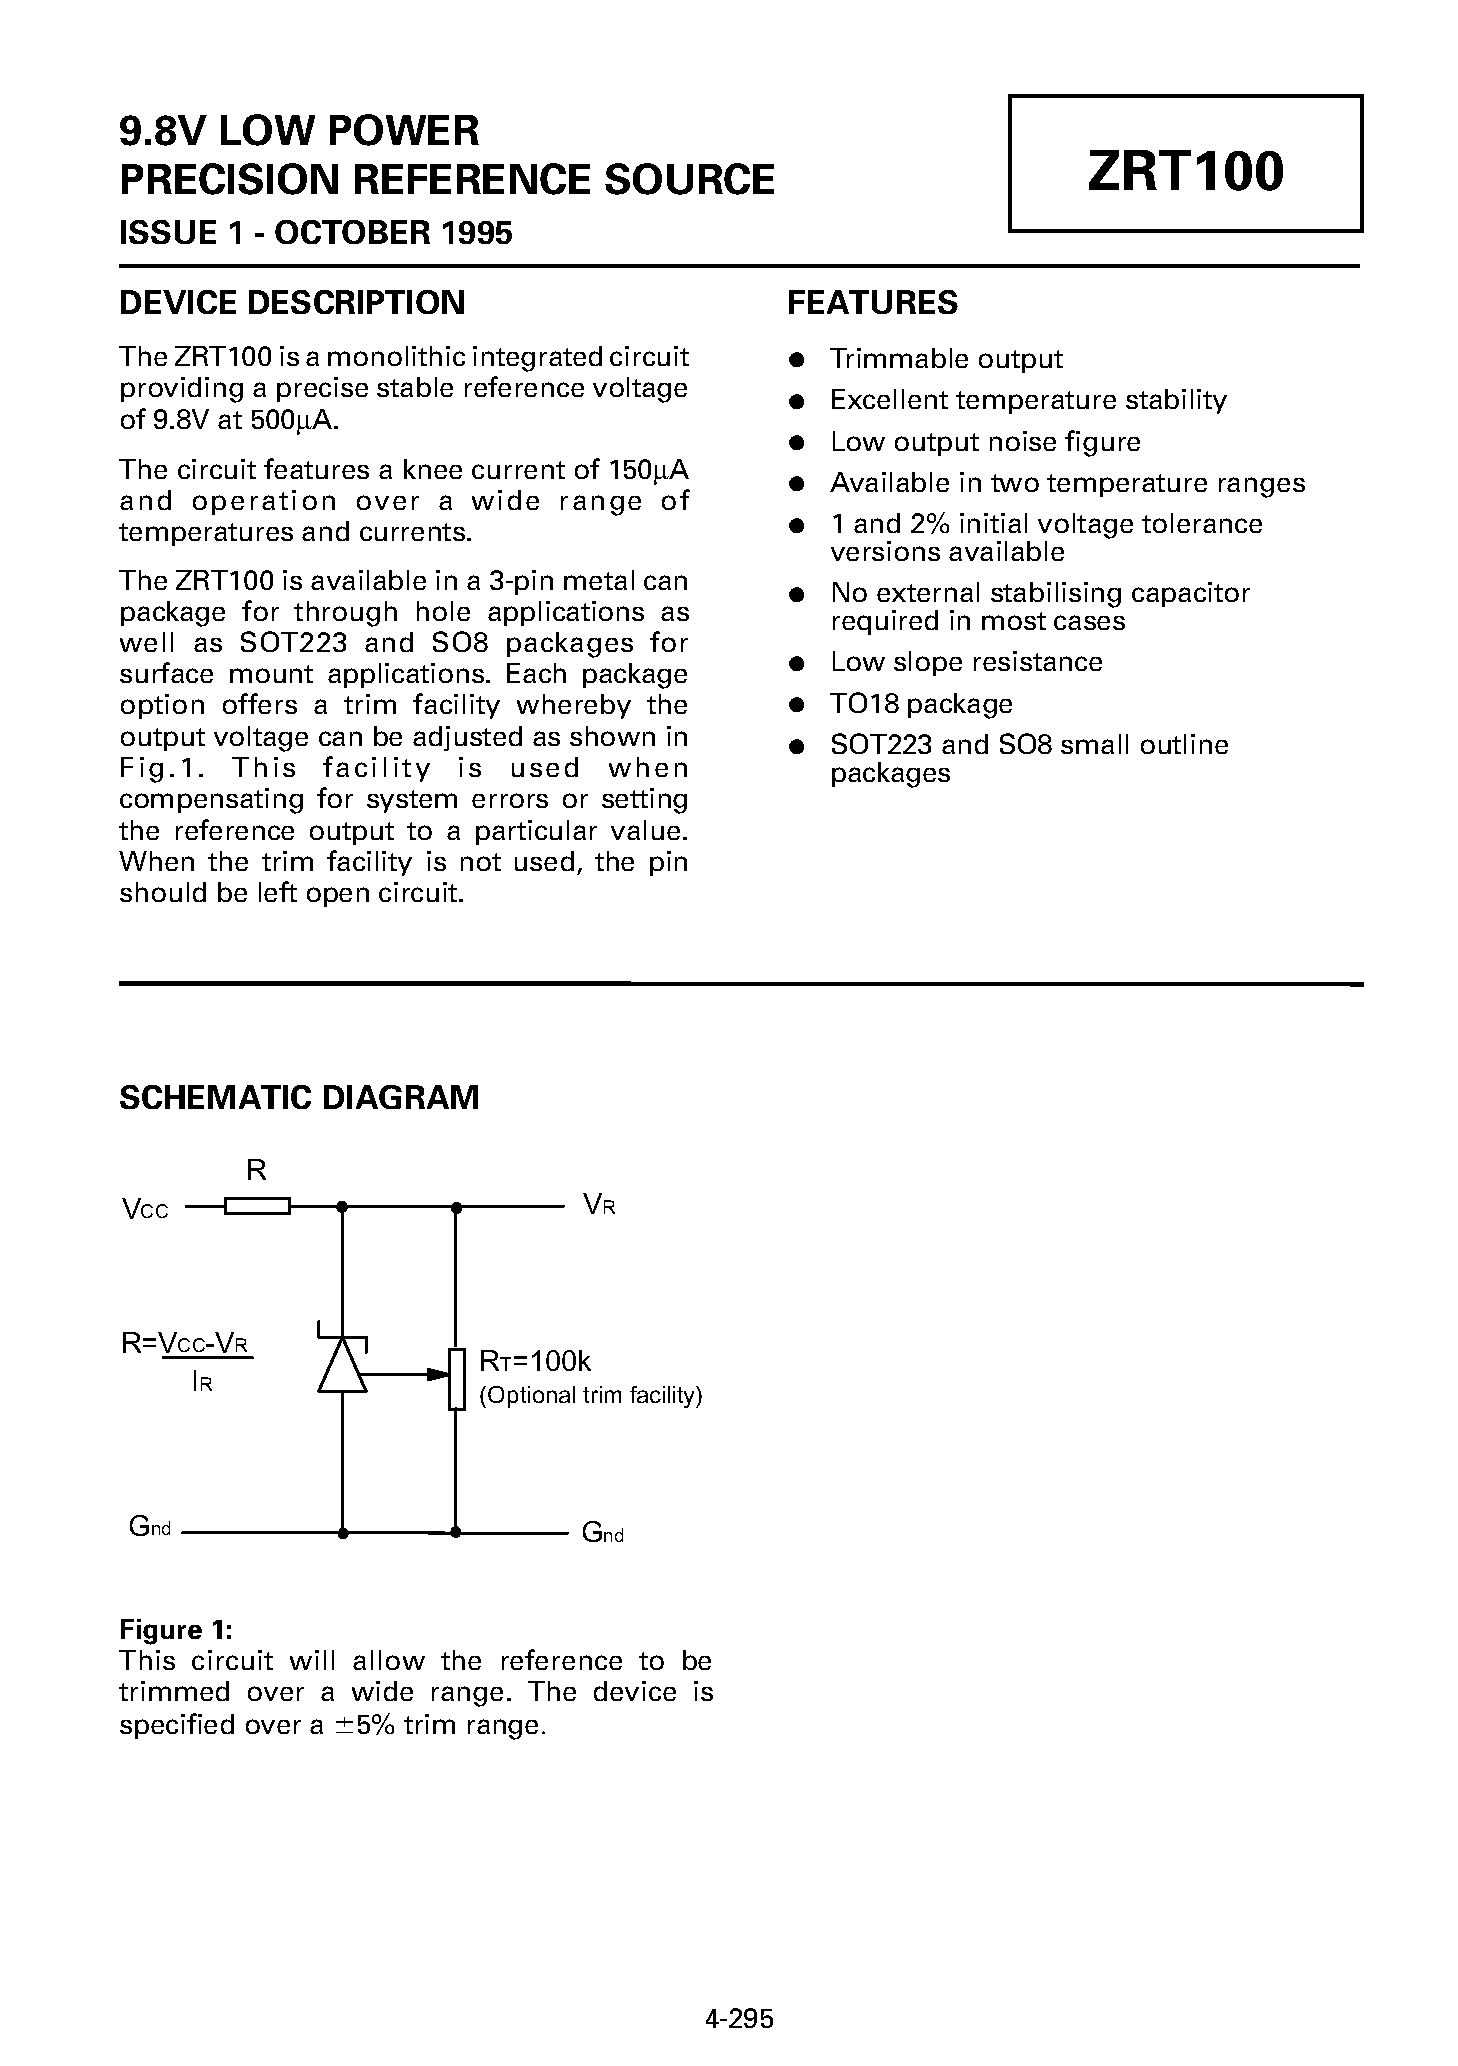 Datasheet ZRT100N8C1 - 9.8V LOW POWER PRECISION REFERENCE SOURCE page 1